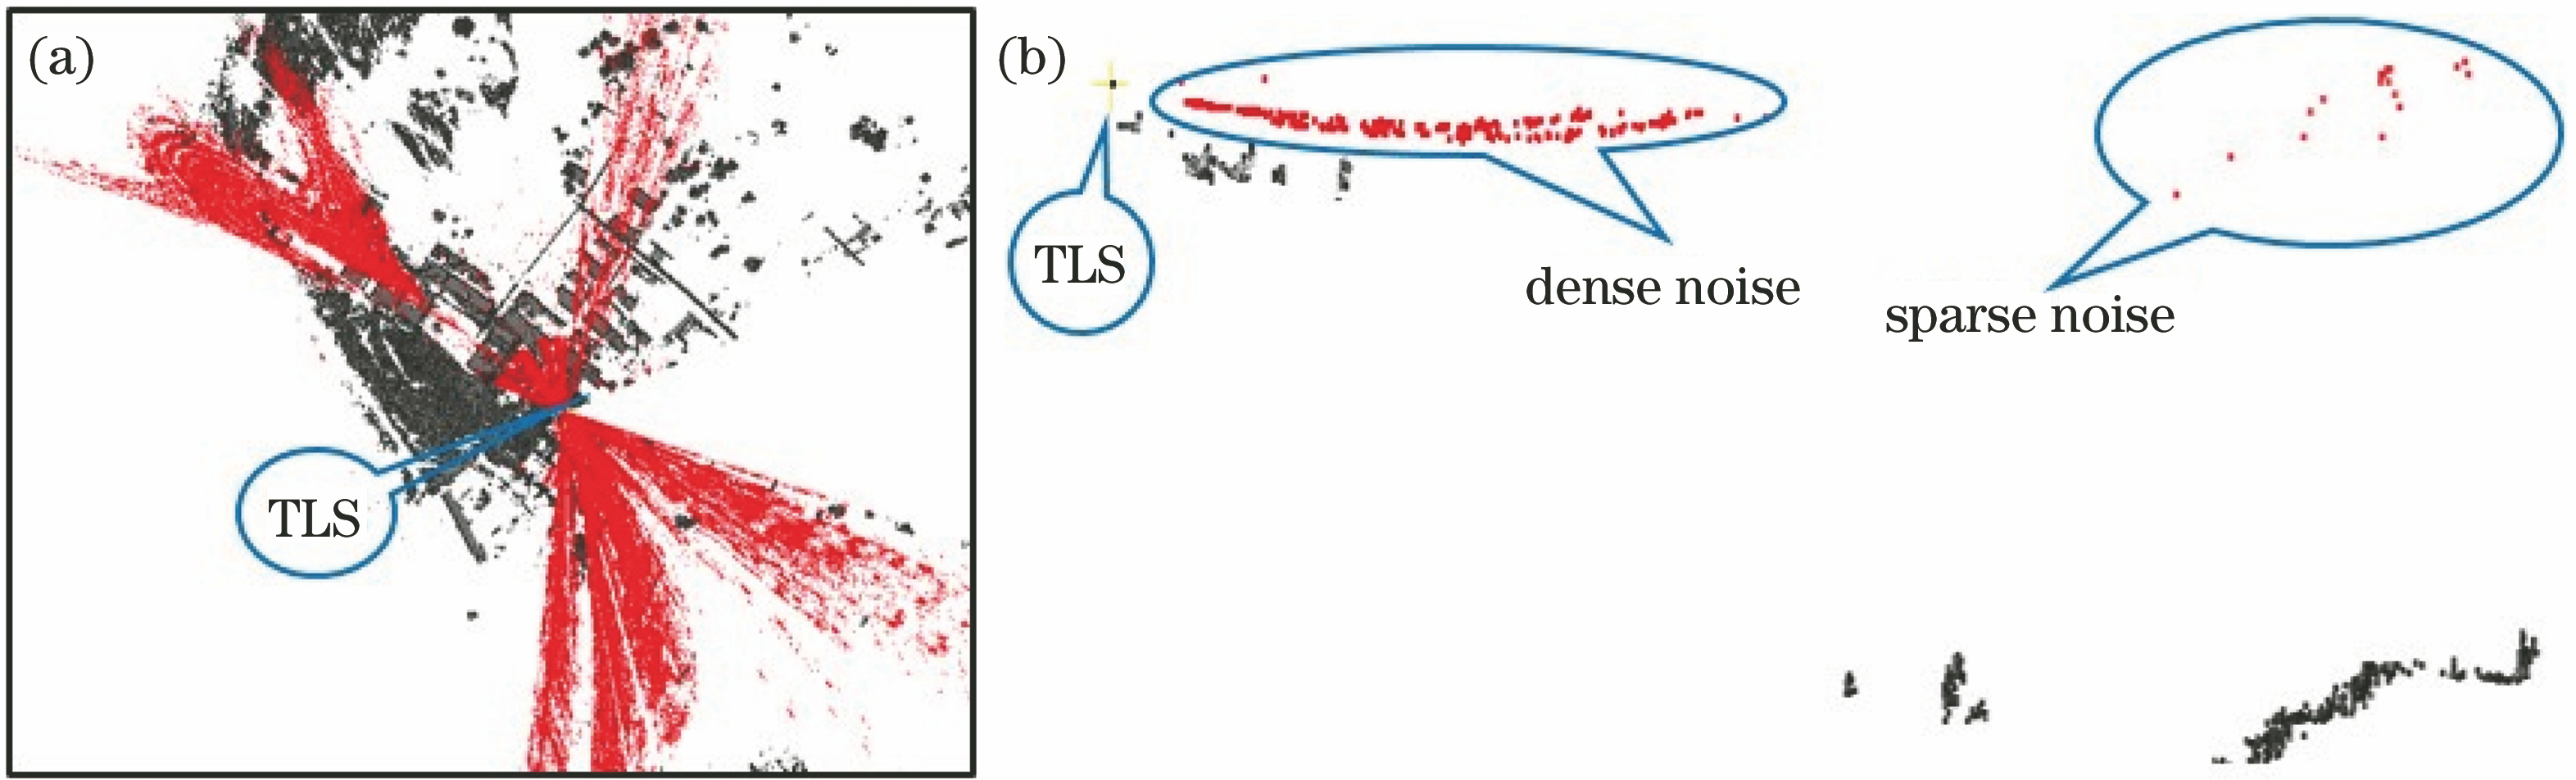 Spatial distribution of noise. (a) Point clouds data nearby TLS; (b) vertical profile along one direction